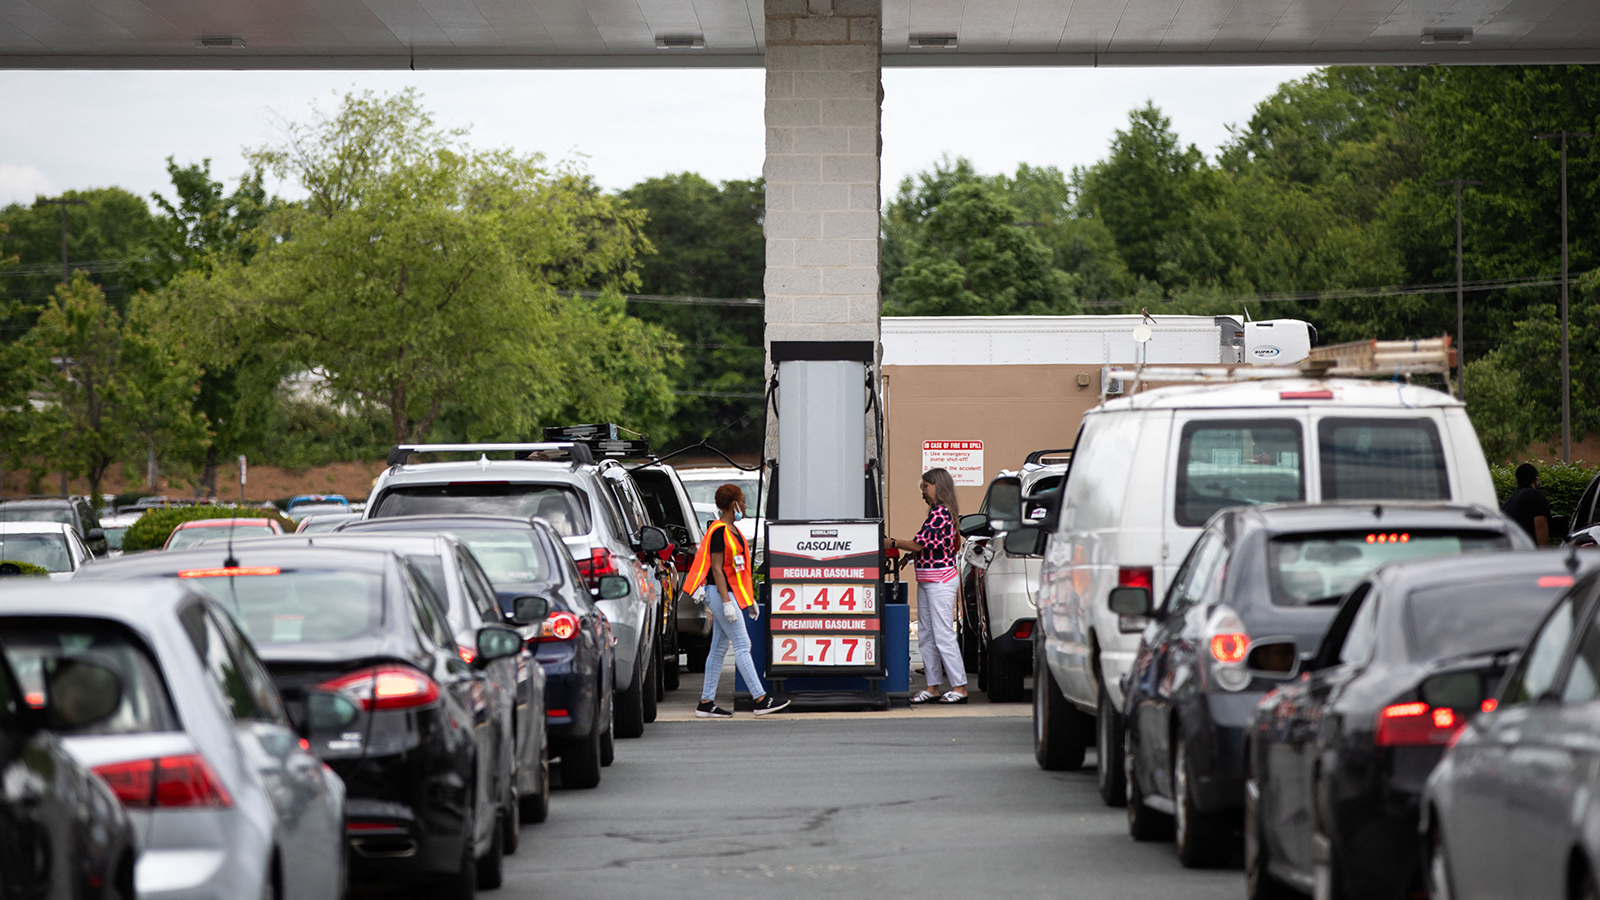 Cars line up to fill their gas tanks at a Costco at Tyvola Road in Charlotte, North Carolina, on May 11.